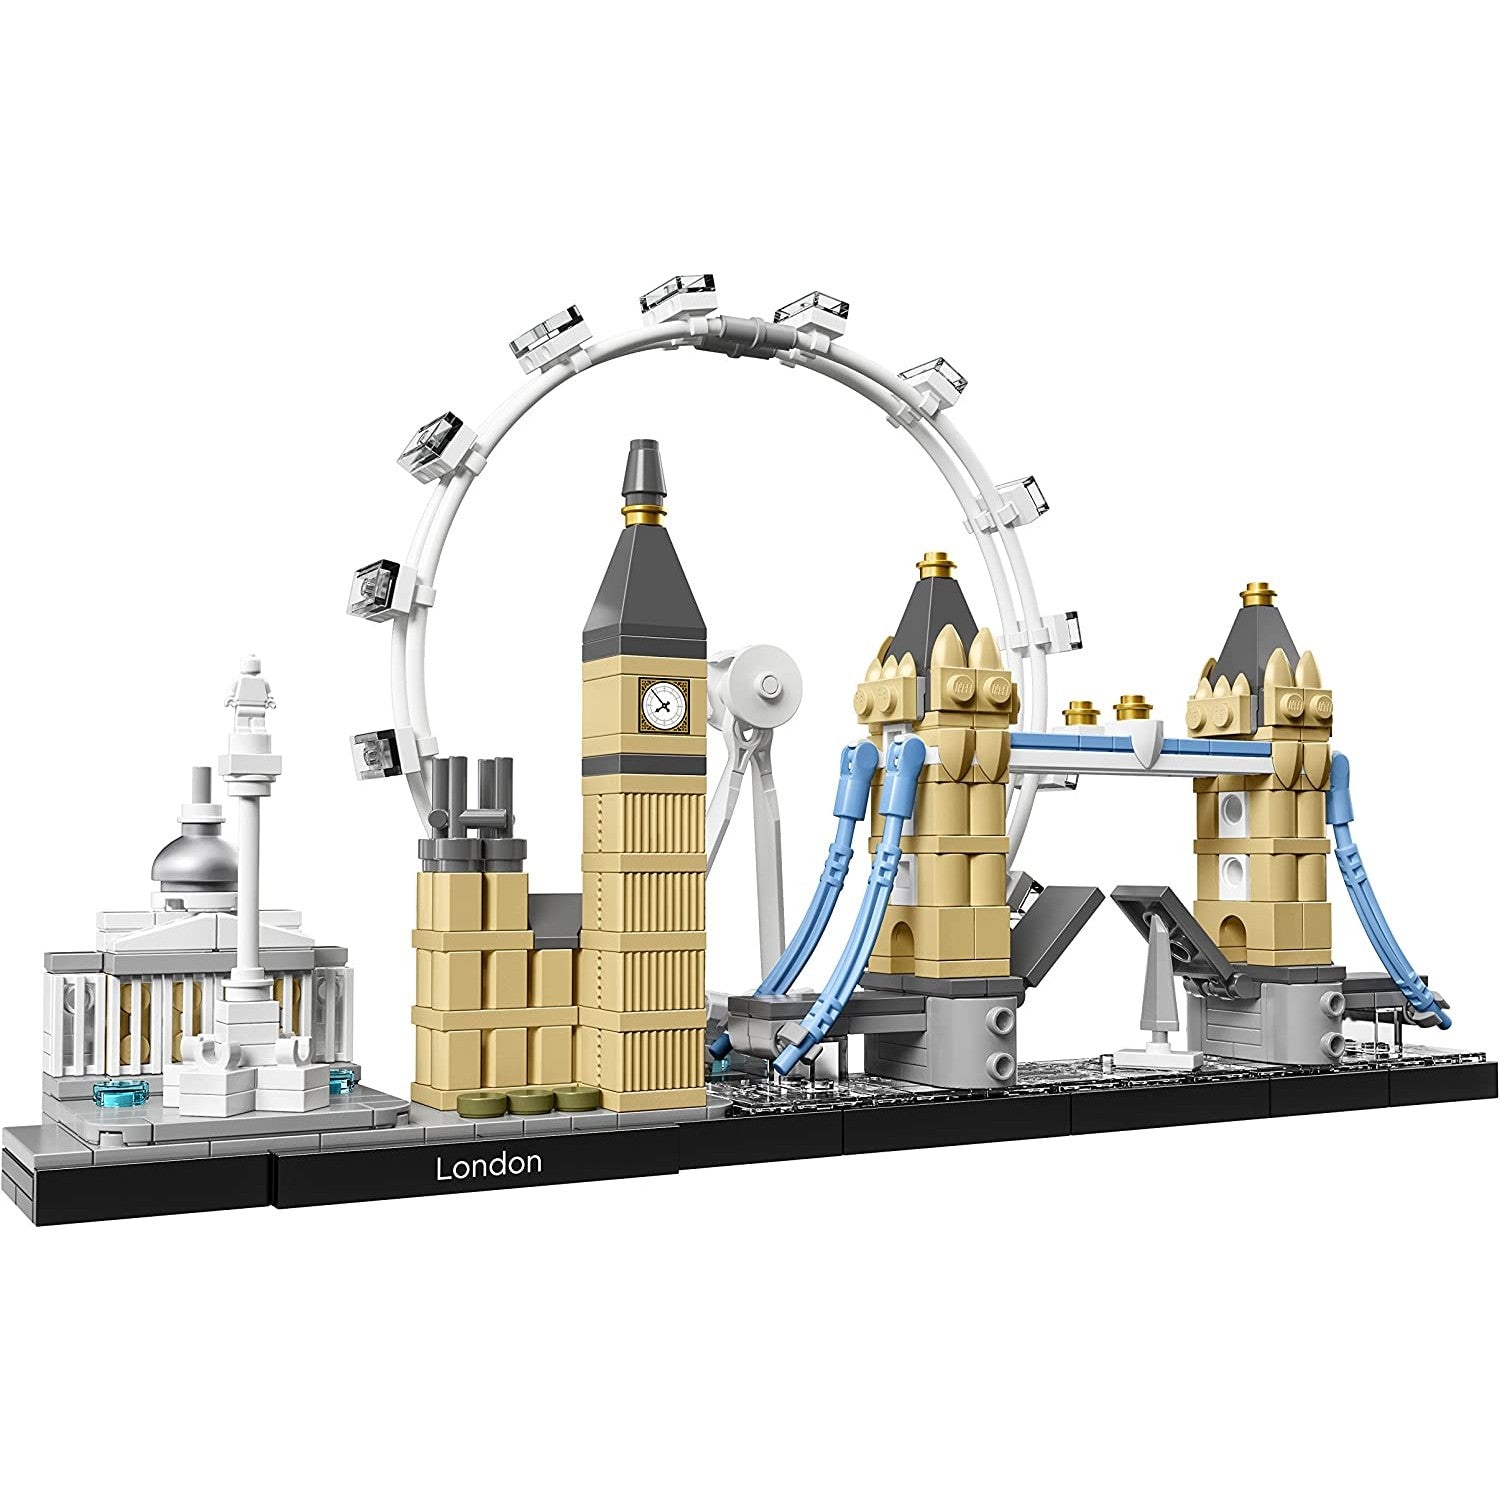 A fully complete and built Lego building set which features the London skyline.